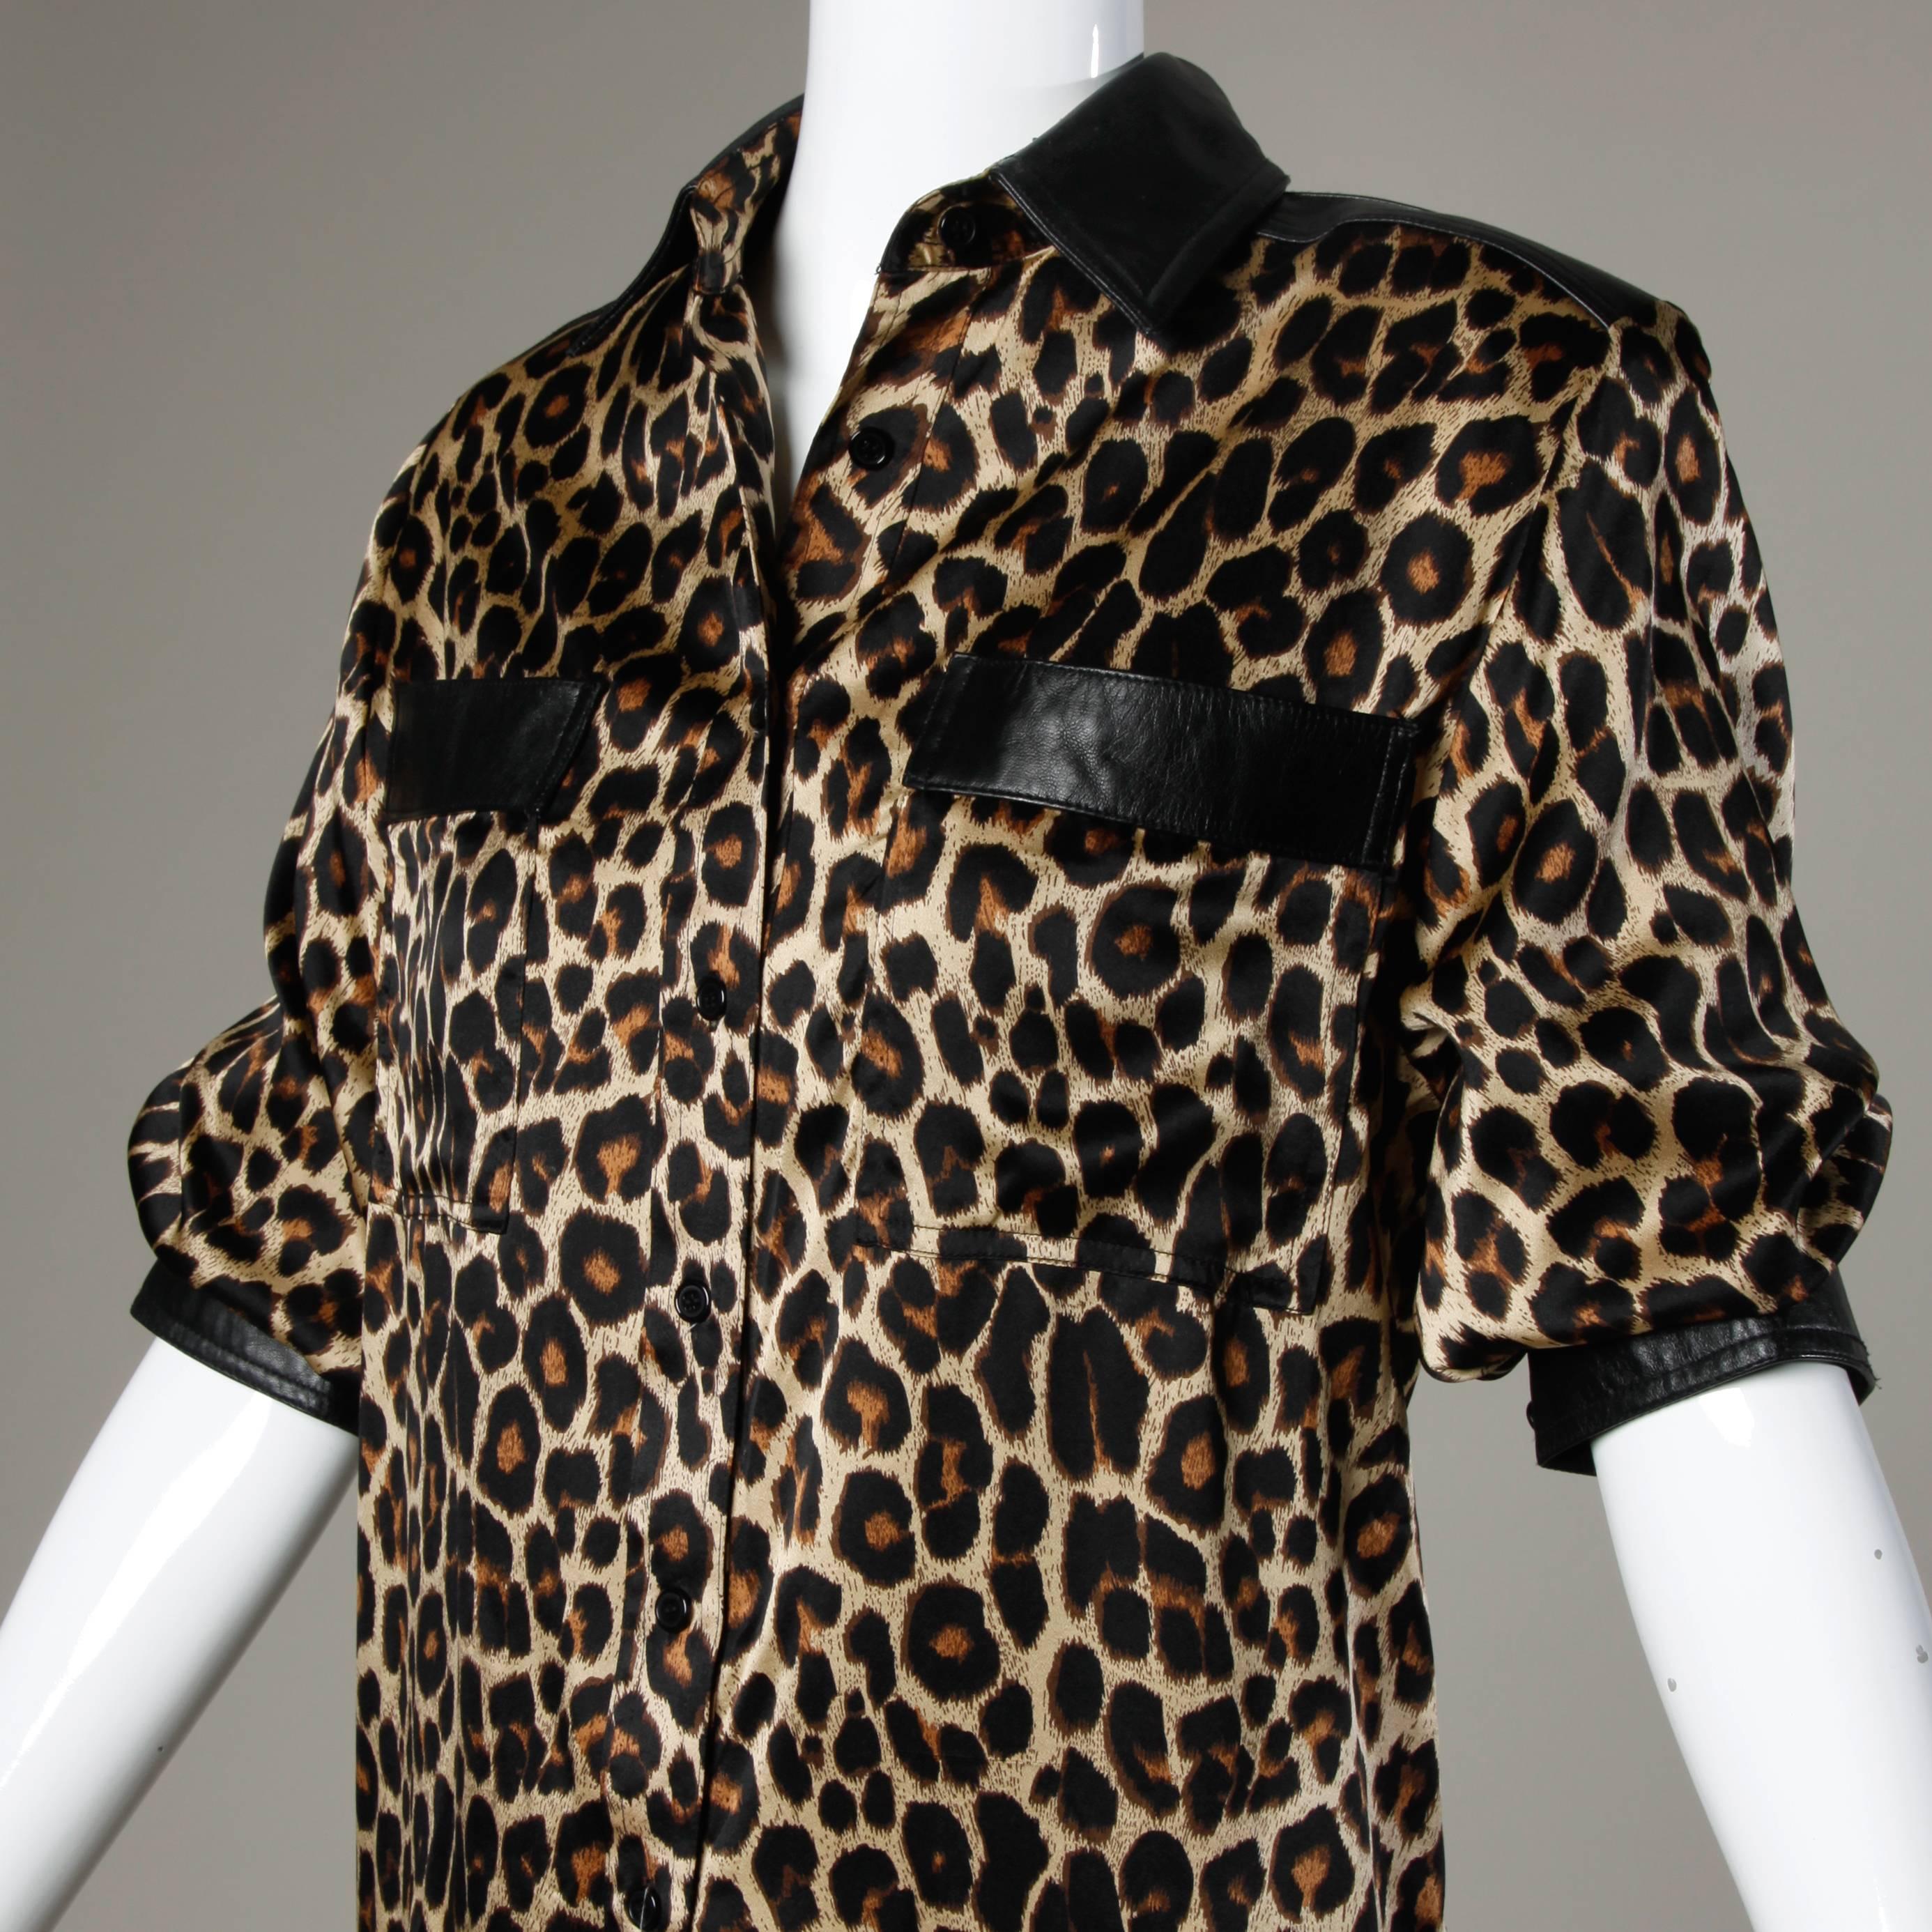 Lillie Rubin vintage silk leopard print button up blouse top with black leather trim and sleeve cuffs.

Details:

Unlined
Front Pockets
Shoulder Pads Can Easily Be Removed If Desired
Front Button Closure
Marked Size: US 4
Estimated Size: